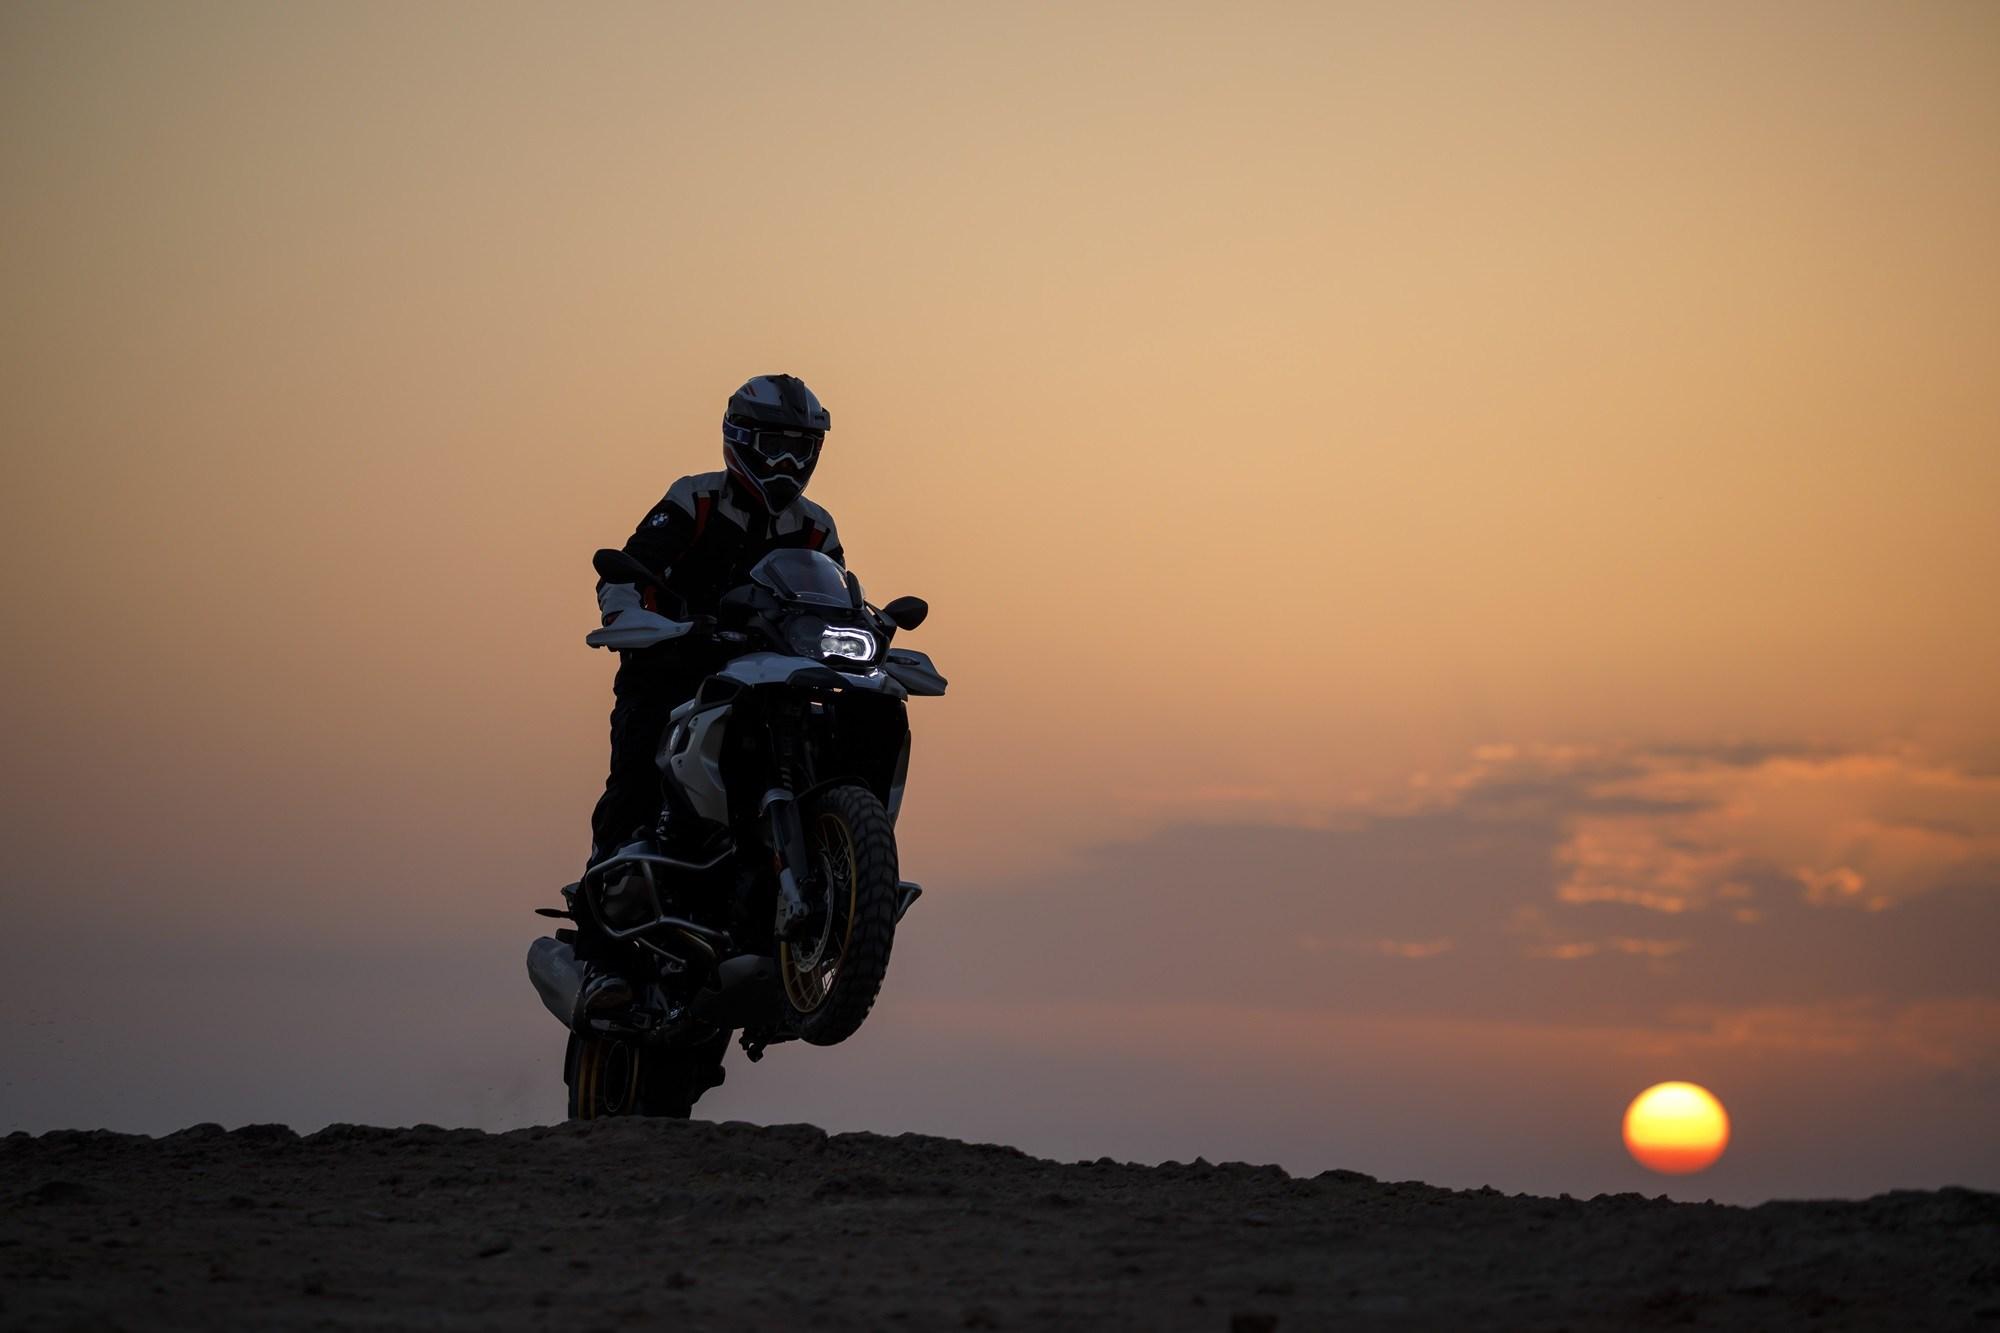 BMW R 1250 GS Line Up Launched In India. IAMABIKER